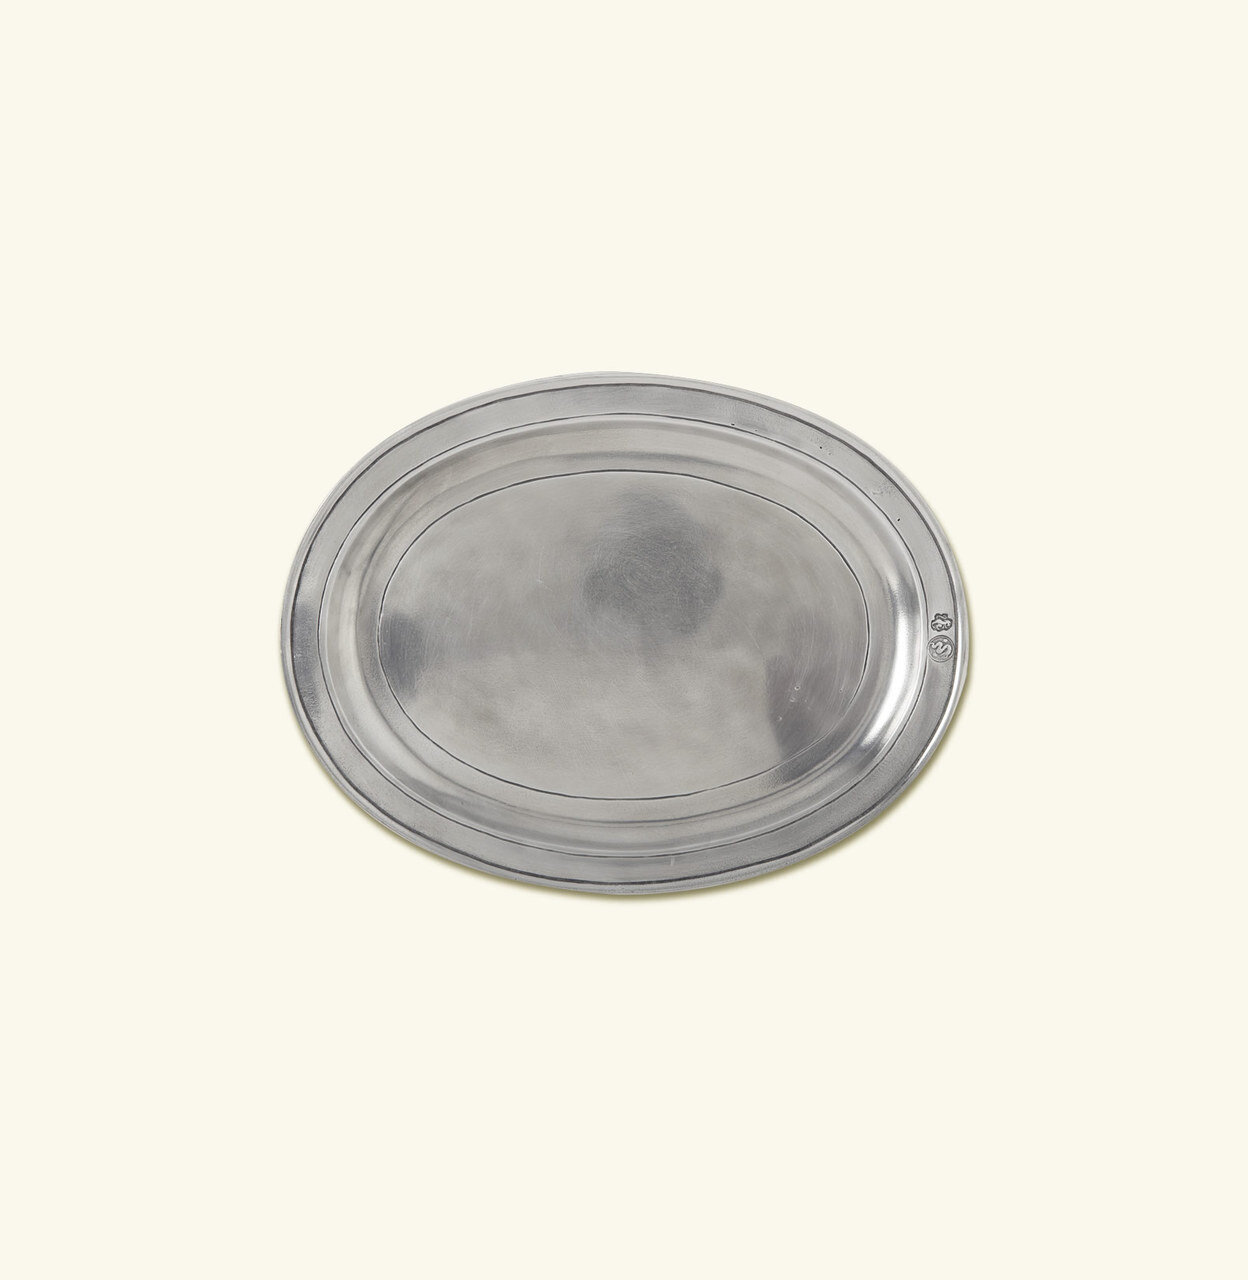 Match Pewter Oval Incised Tray Small/Medium 847.3